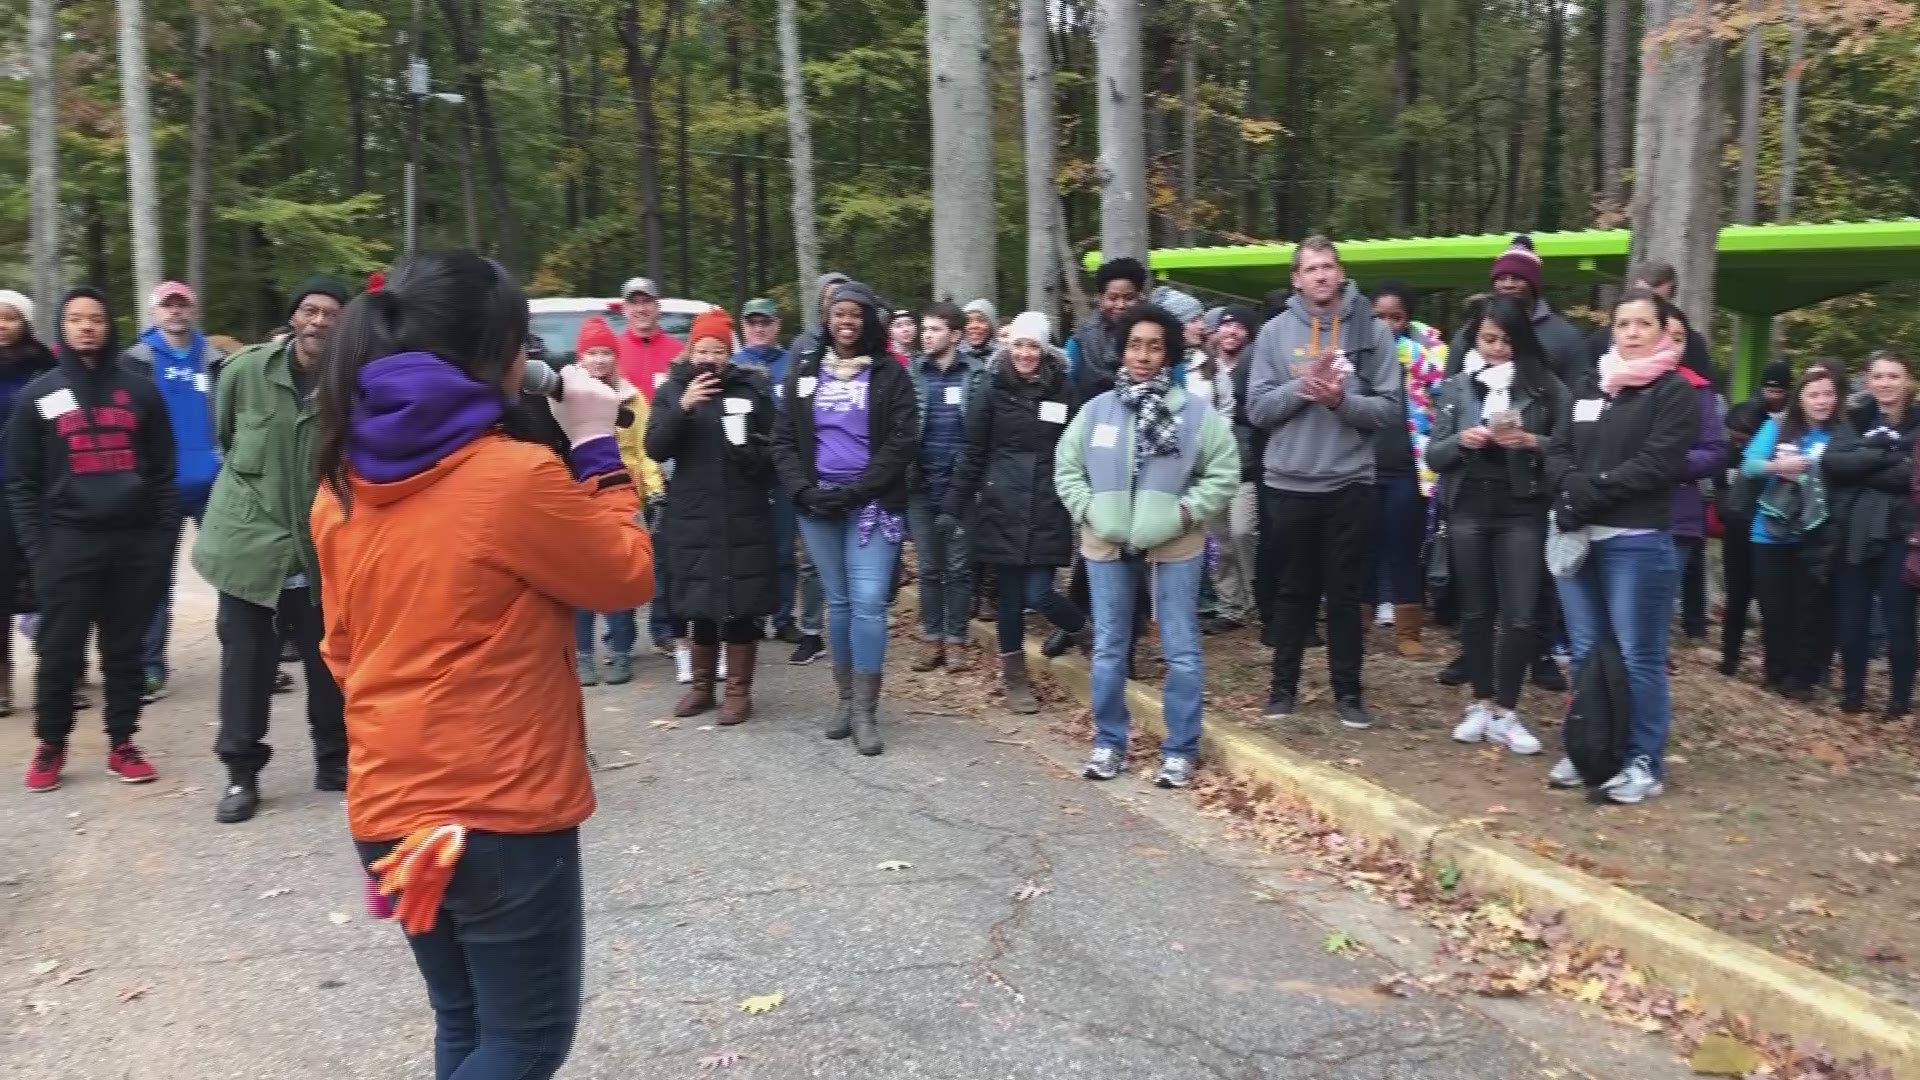 East Point Parks & Recreation partners with KaBOOM! and Newell Brands to rebuild Sykes Park